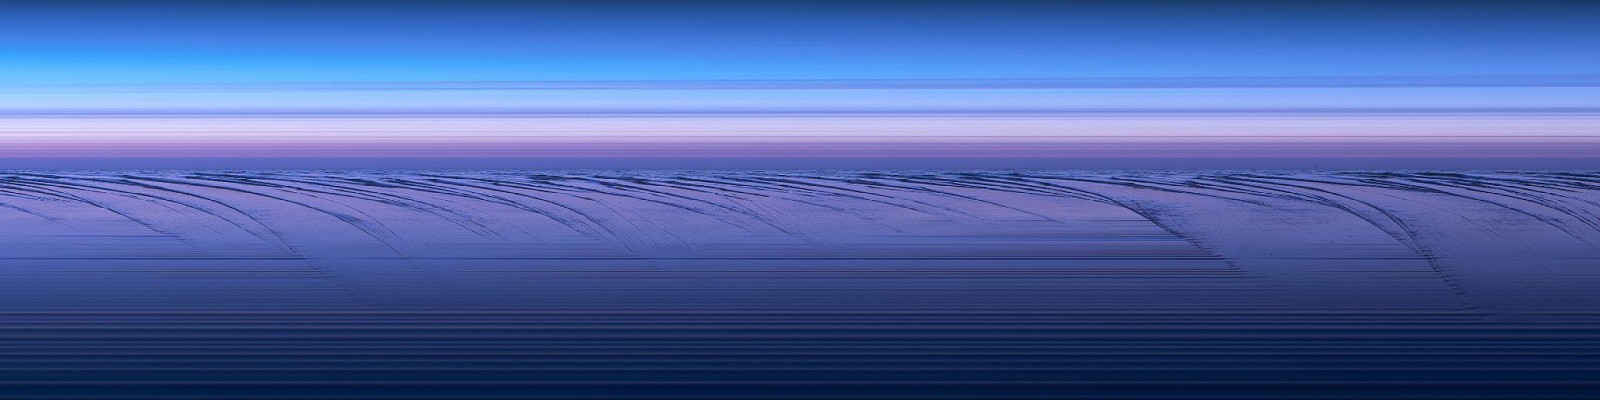 Jay Mark Johnson, FORT DE SOTO SUNSET WAVES #31-2, 2013 Fort De Soto, FL
archival pigment on paper, mounted on aluminum, 40 x 160 in. (101.6 x 406.4 cm)